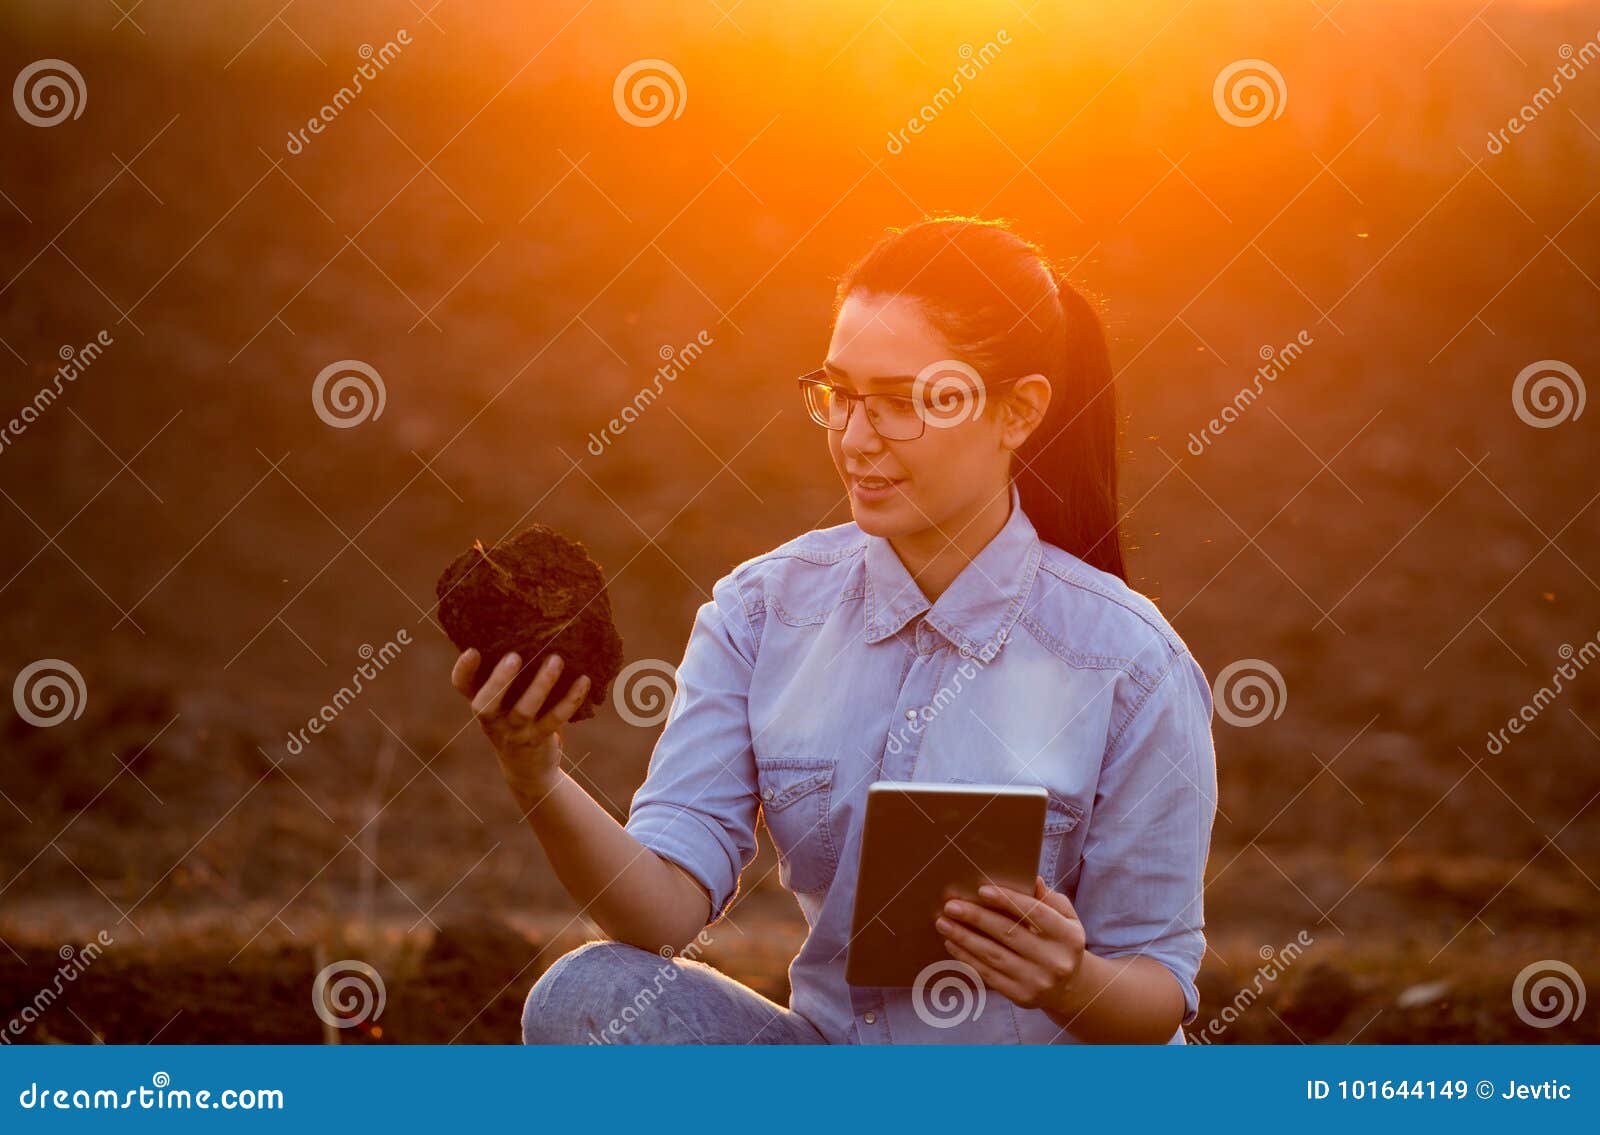 woman with tablet and earth clod